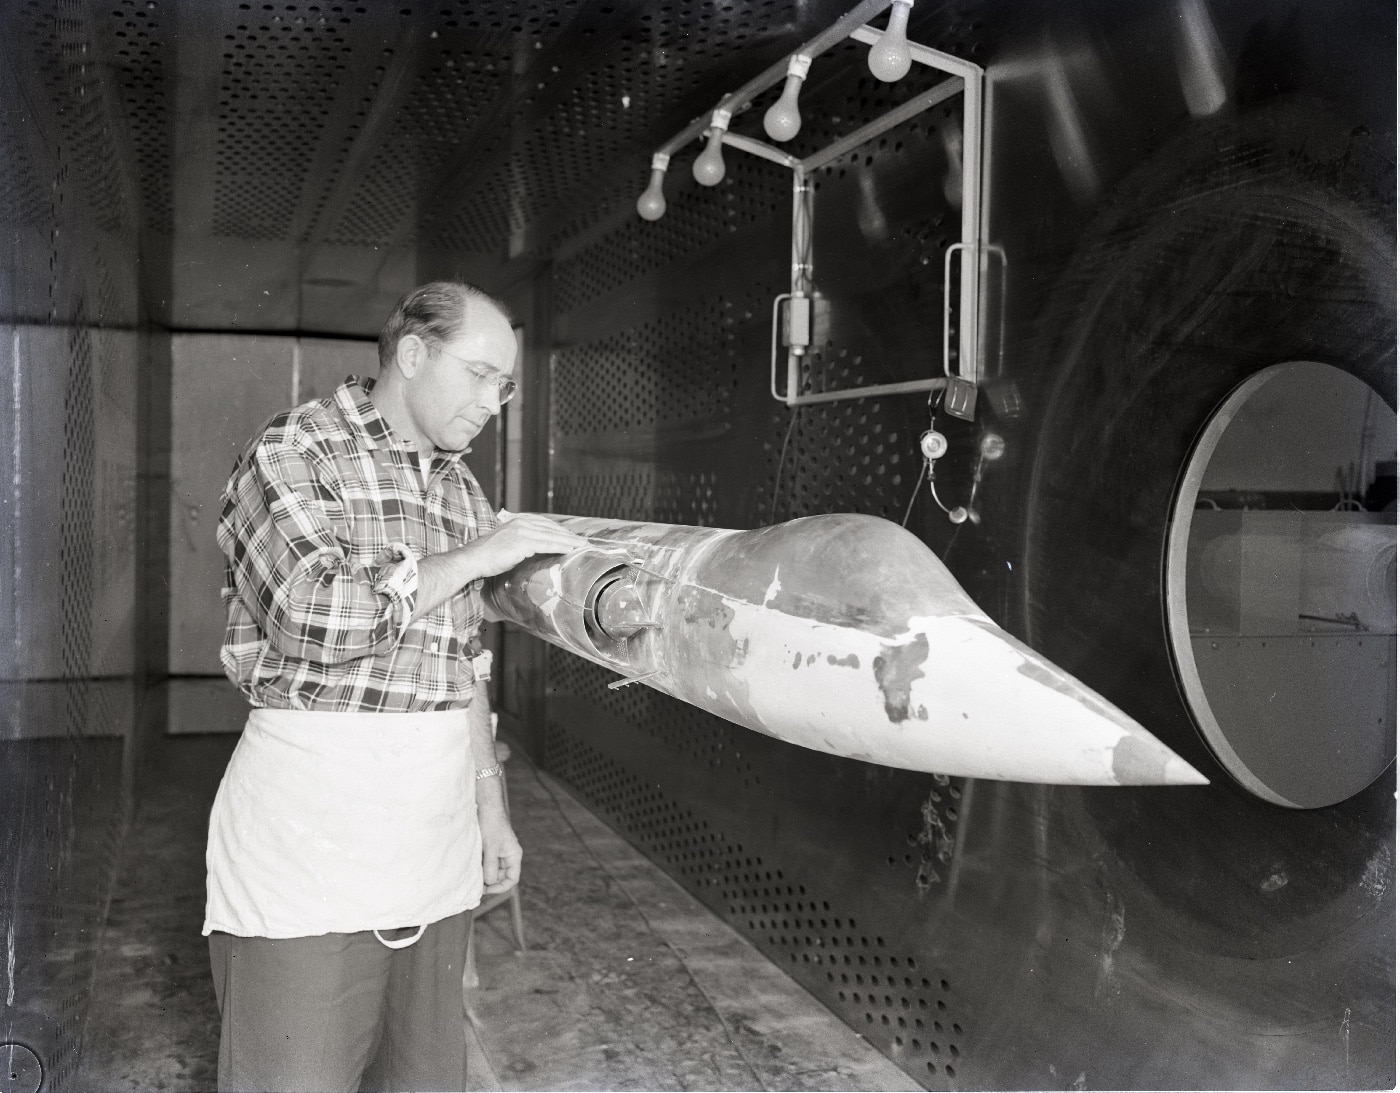 In this black and white digital photograph of aerospace engineers working with a scale model of the Lockheed F-104 Starfighter. Developed by Lockheed — later Lockheed Martin — the Starfighter was the first two-seat General Electric aircraft to set an altitude record and world speed record on its first flight when named the XF-104 or YF-104A. Both the Tactical Air Command and Flight Research Center saw a great deal of potential when the aircraft first flew. 